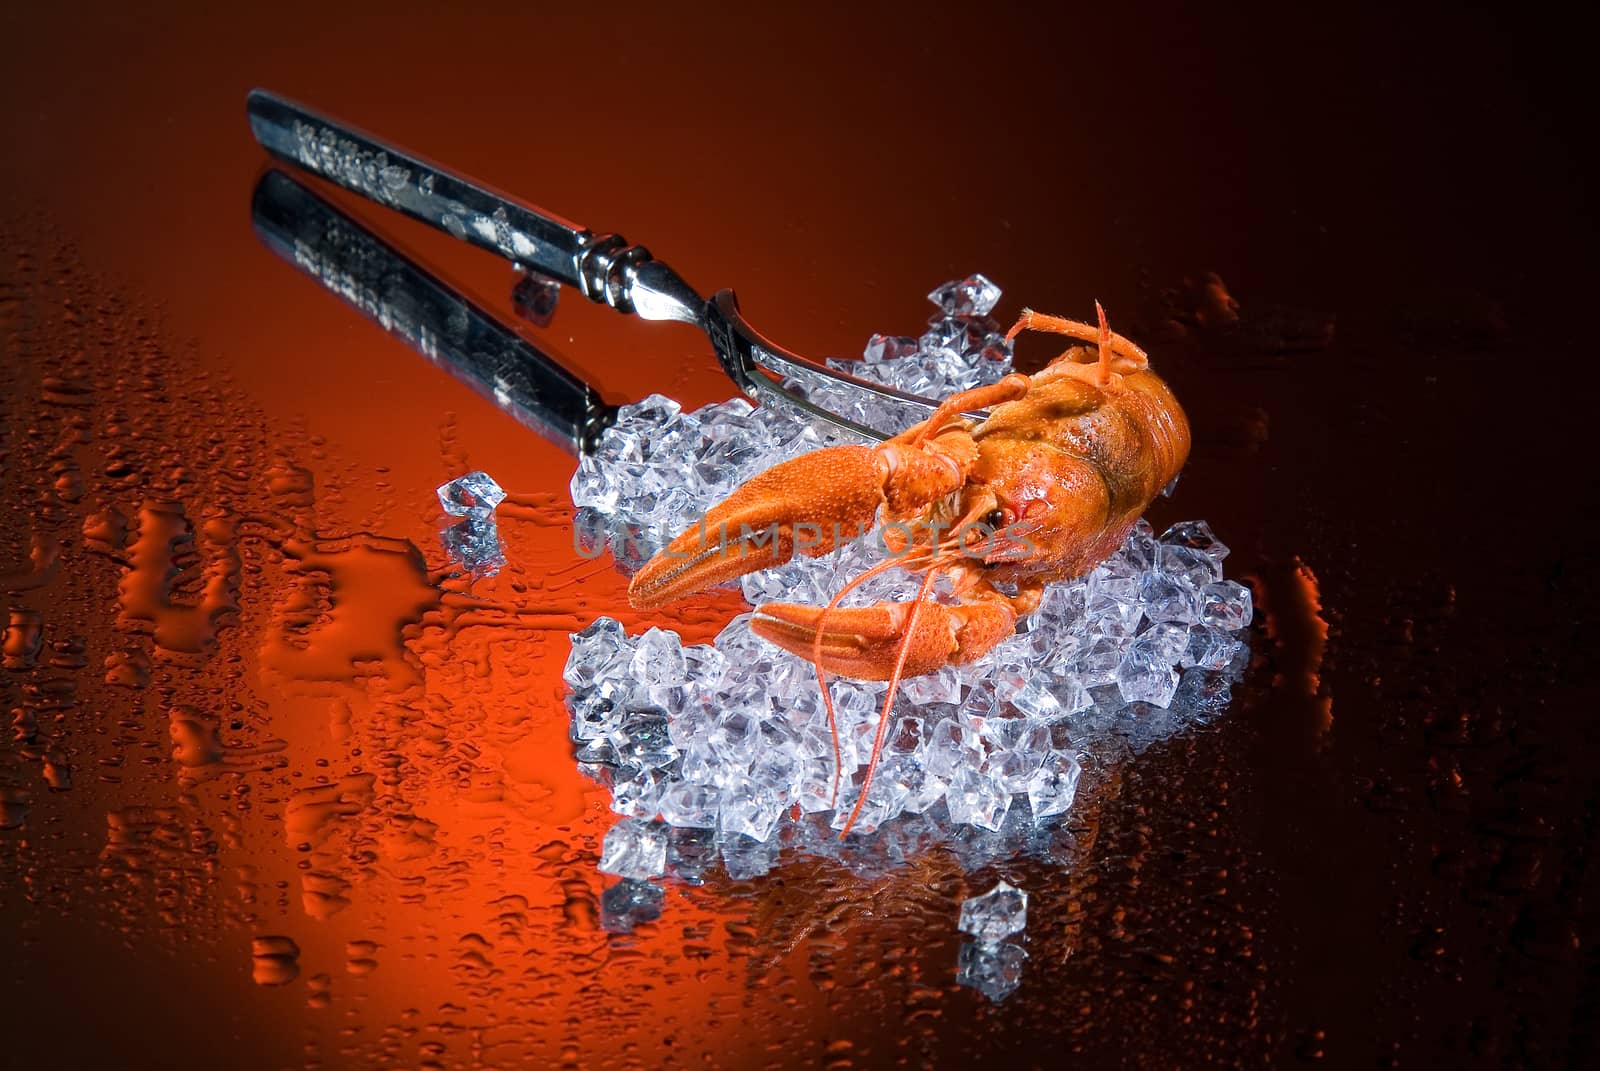 Fork, cristal of ice and crawfish on a glass background